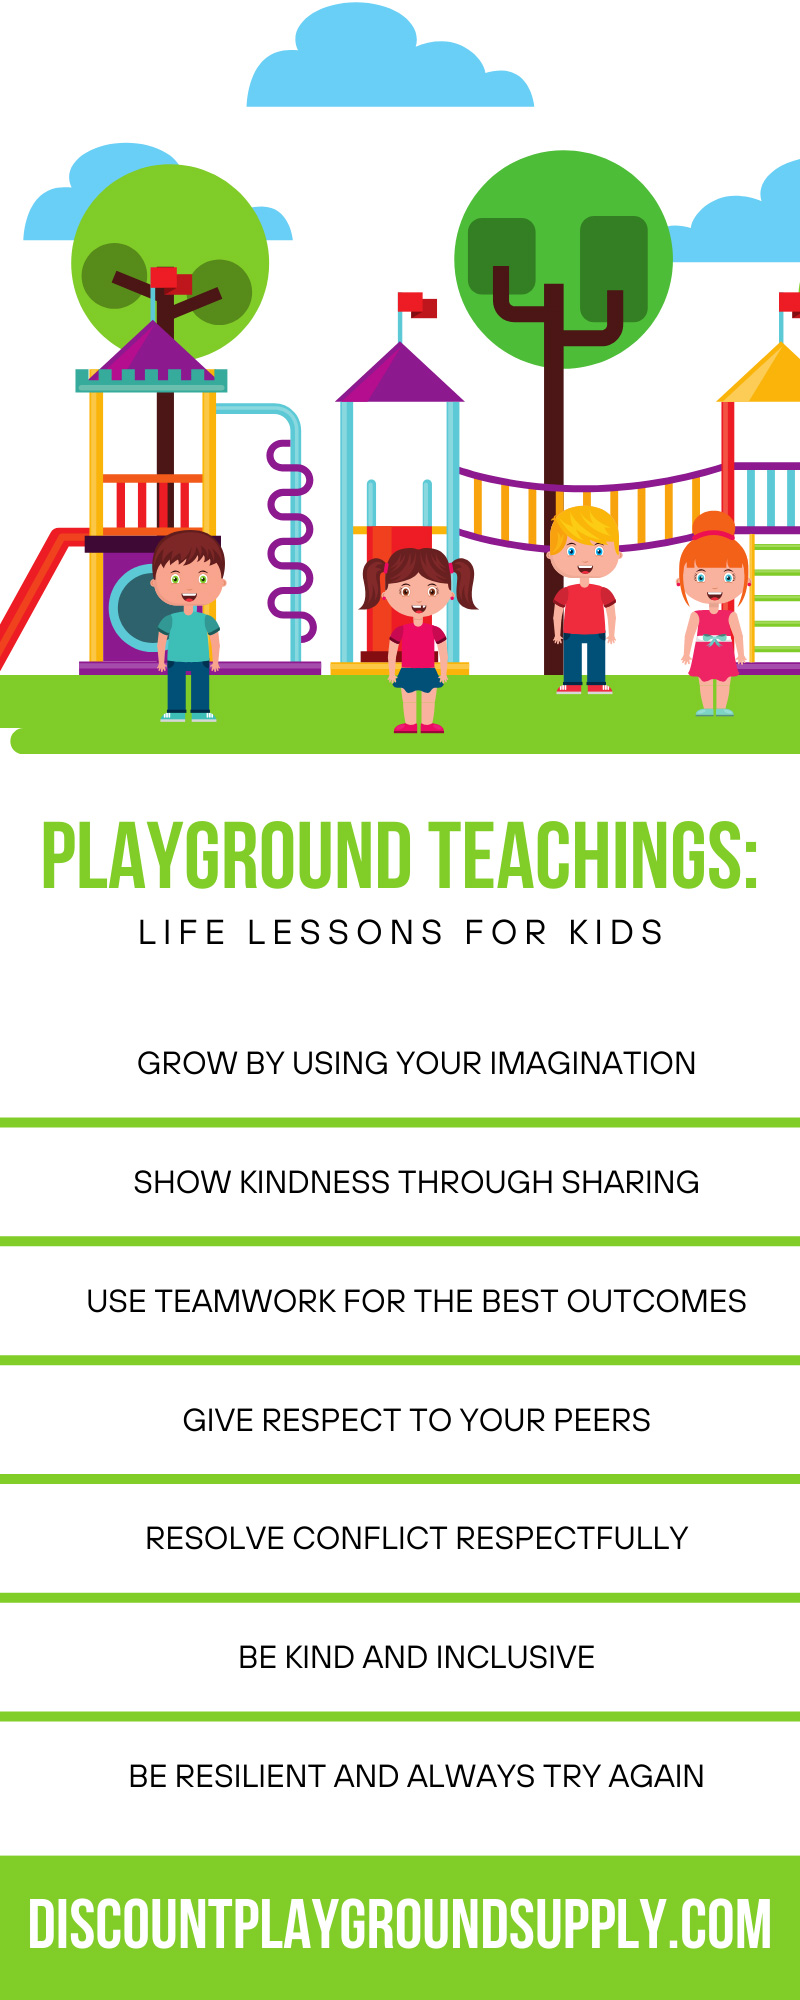 Playground Teachings: Life Lessons for Kids